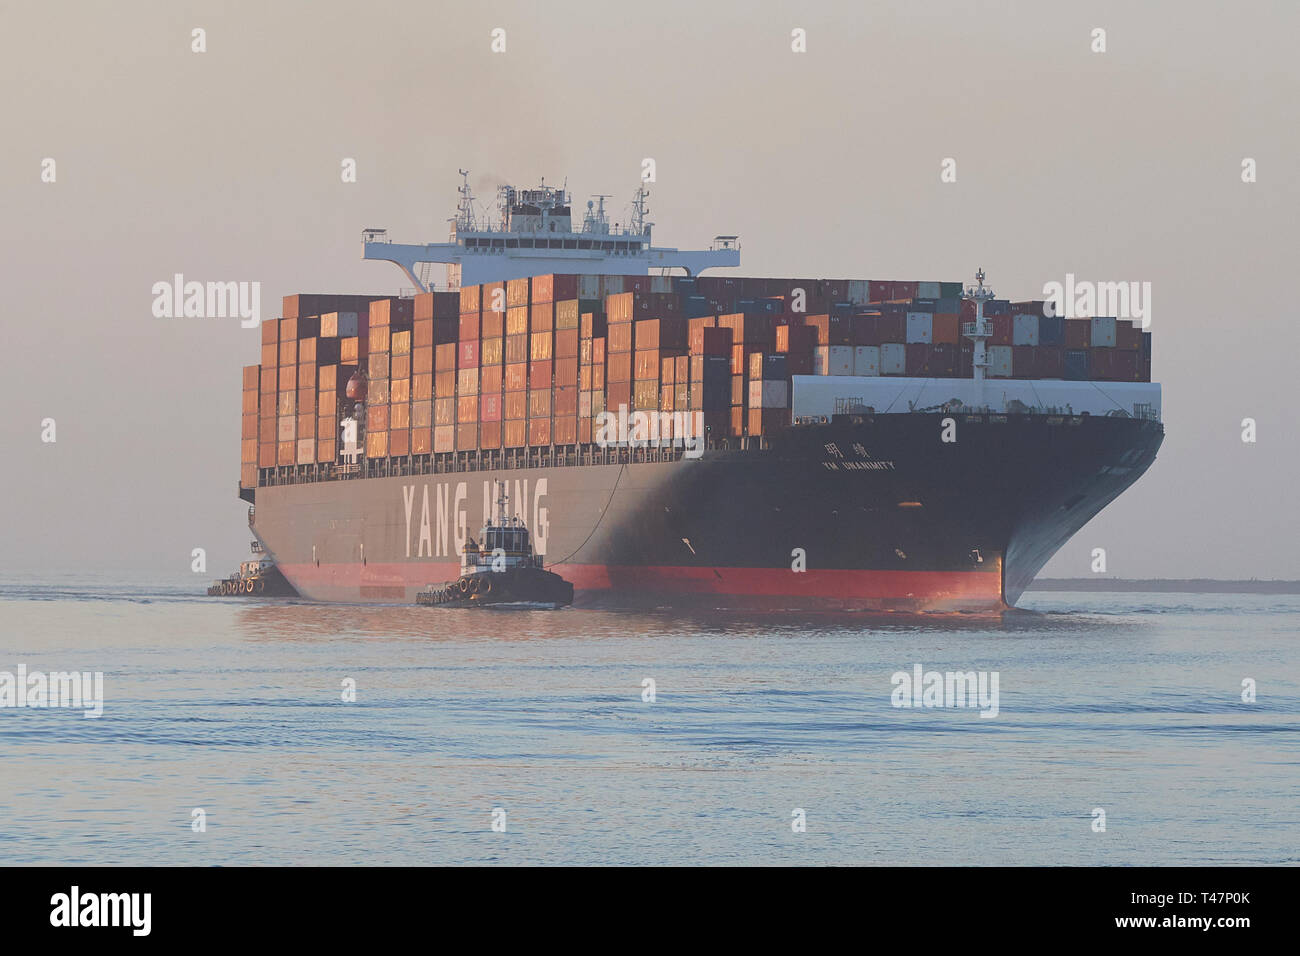 The YANG MING Container Ship, YM UNANIMITY, Enters The Los Angeles Main Channel, Steaming Towards The Los Angeles Container Terminal, California, USA. Stock Photo